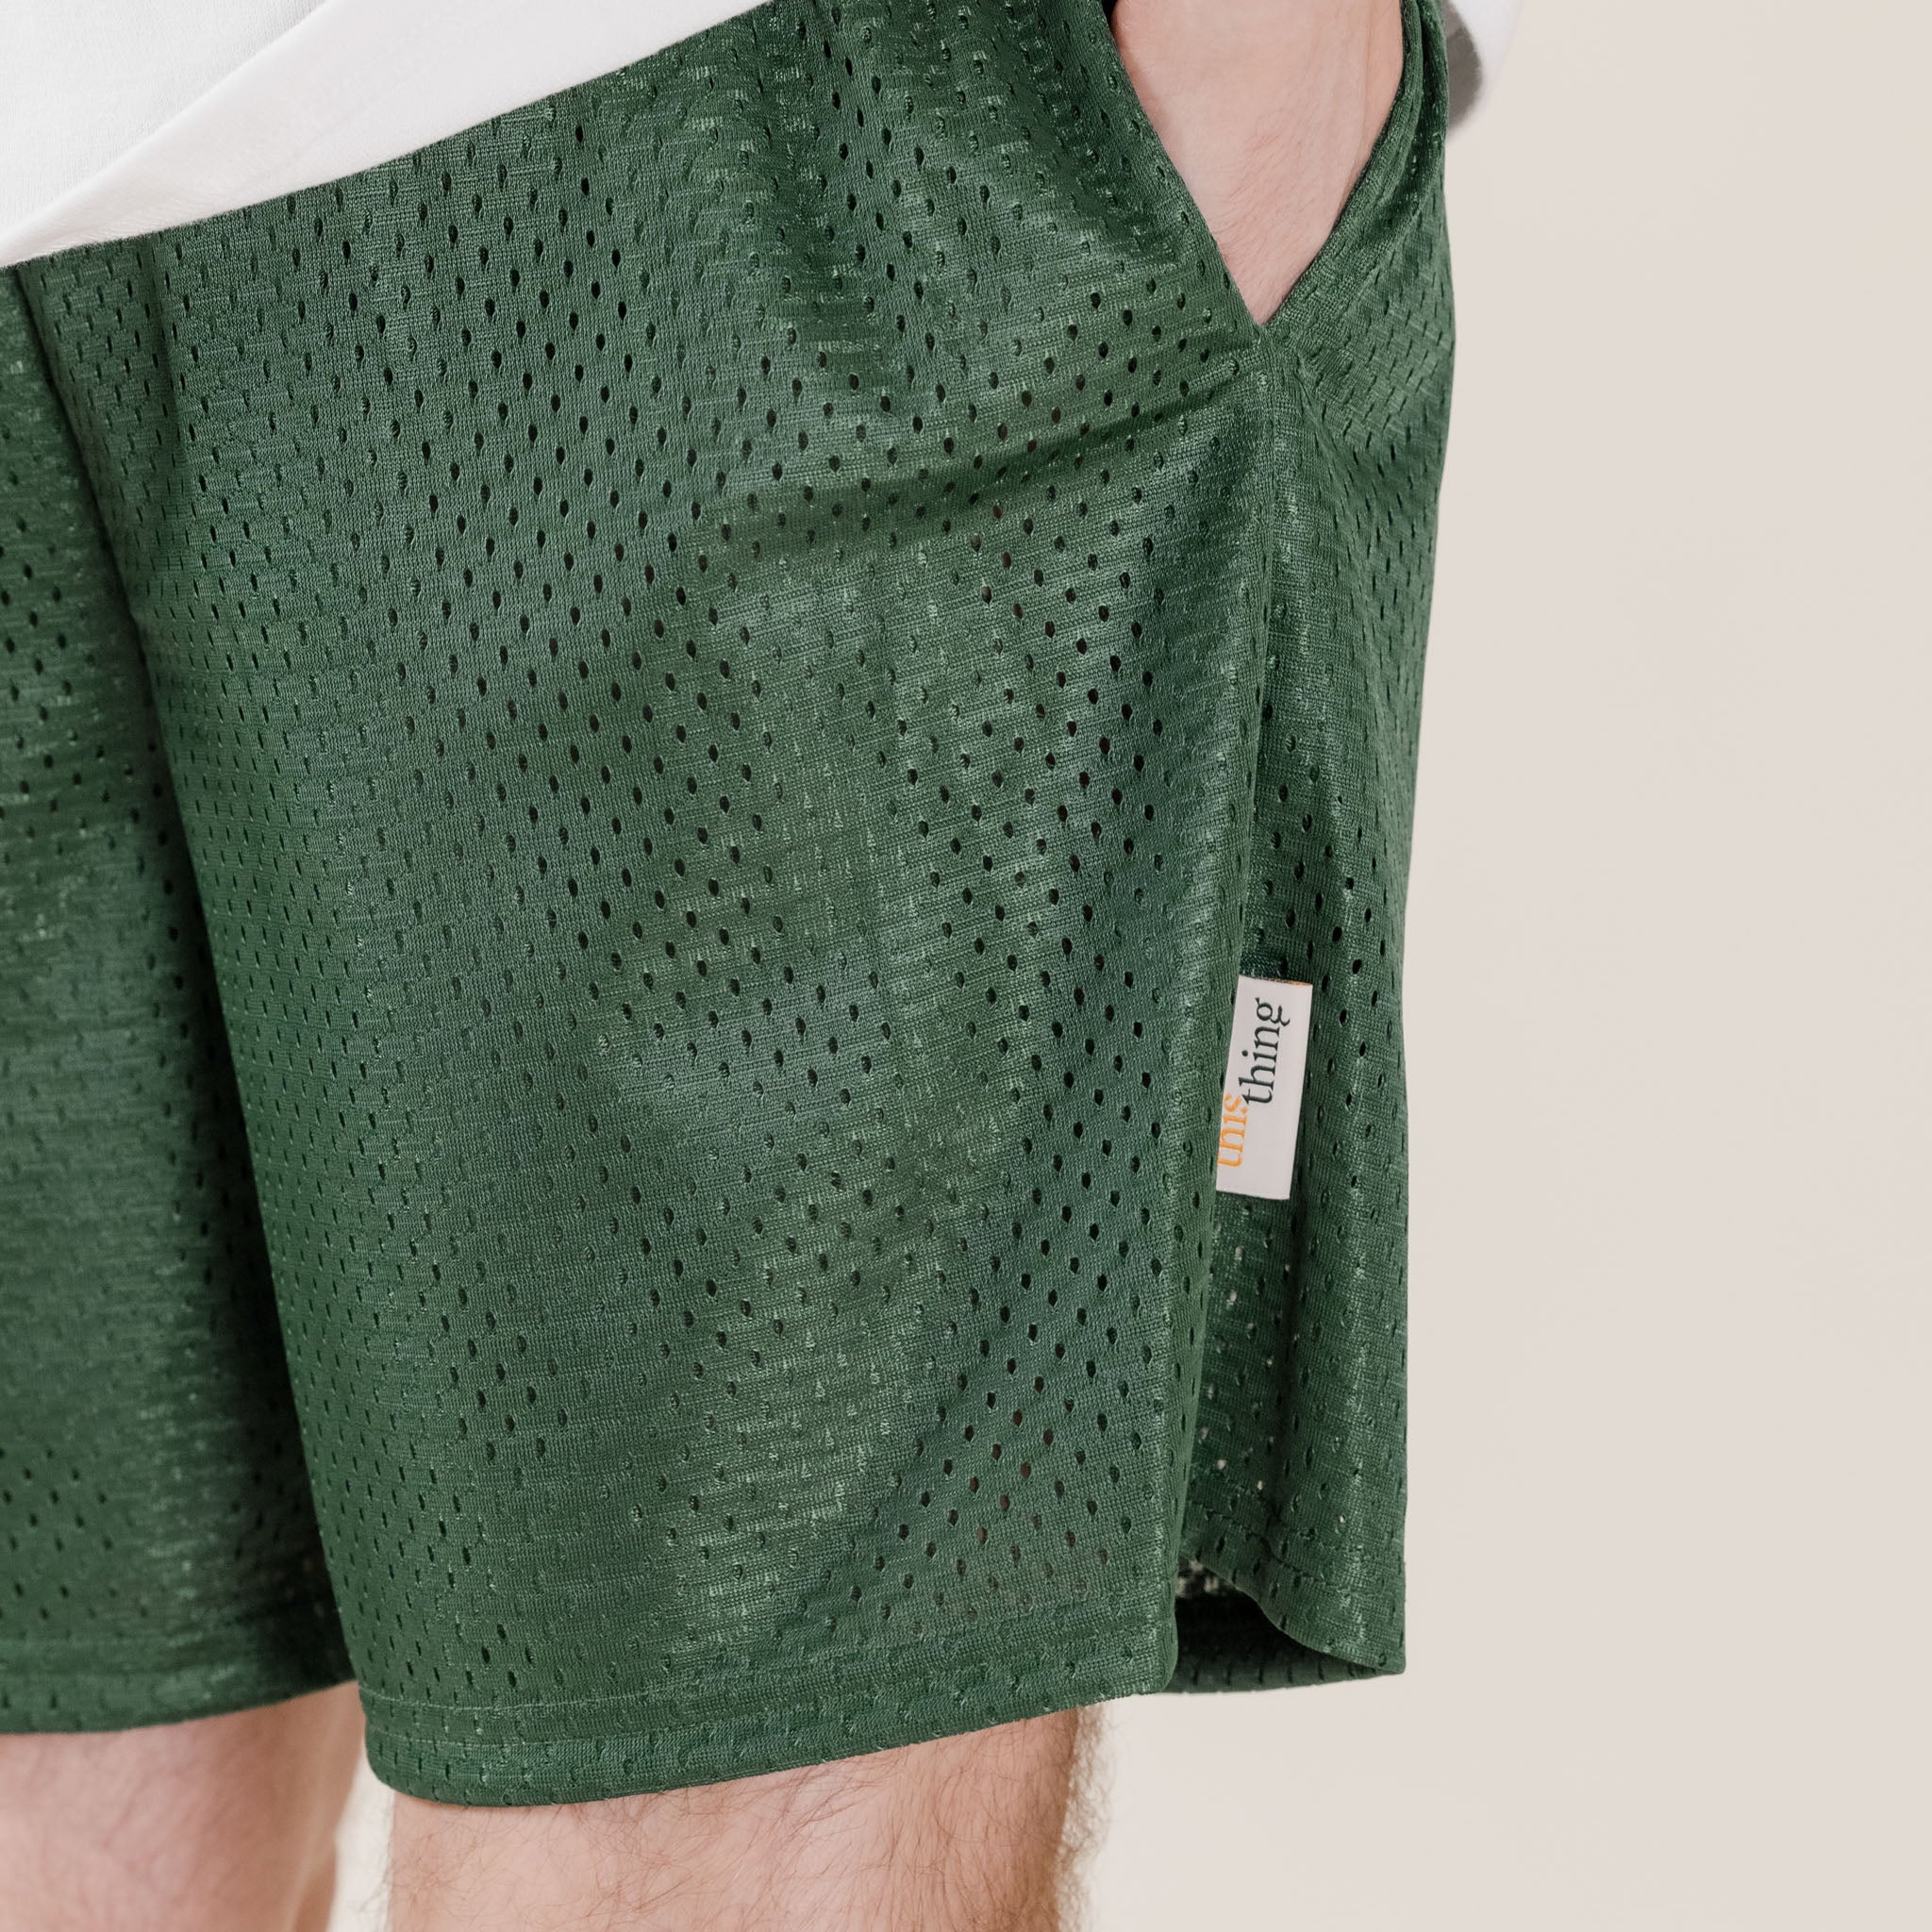 This Thing - Made in USA Mesh Shorts - Forest Green Basketball Mesh Shorts